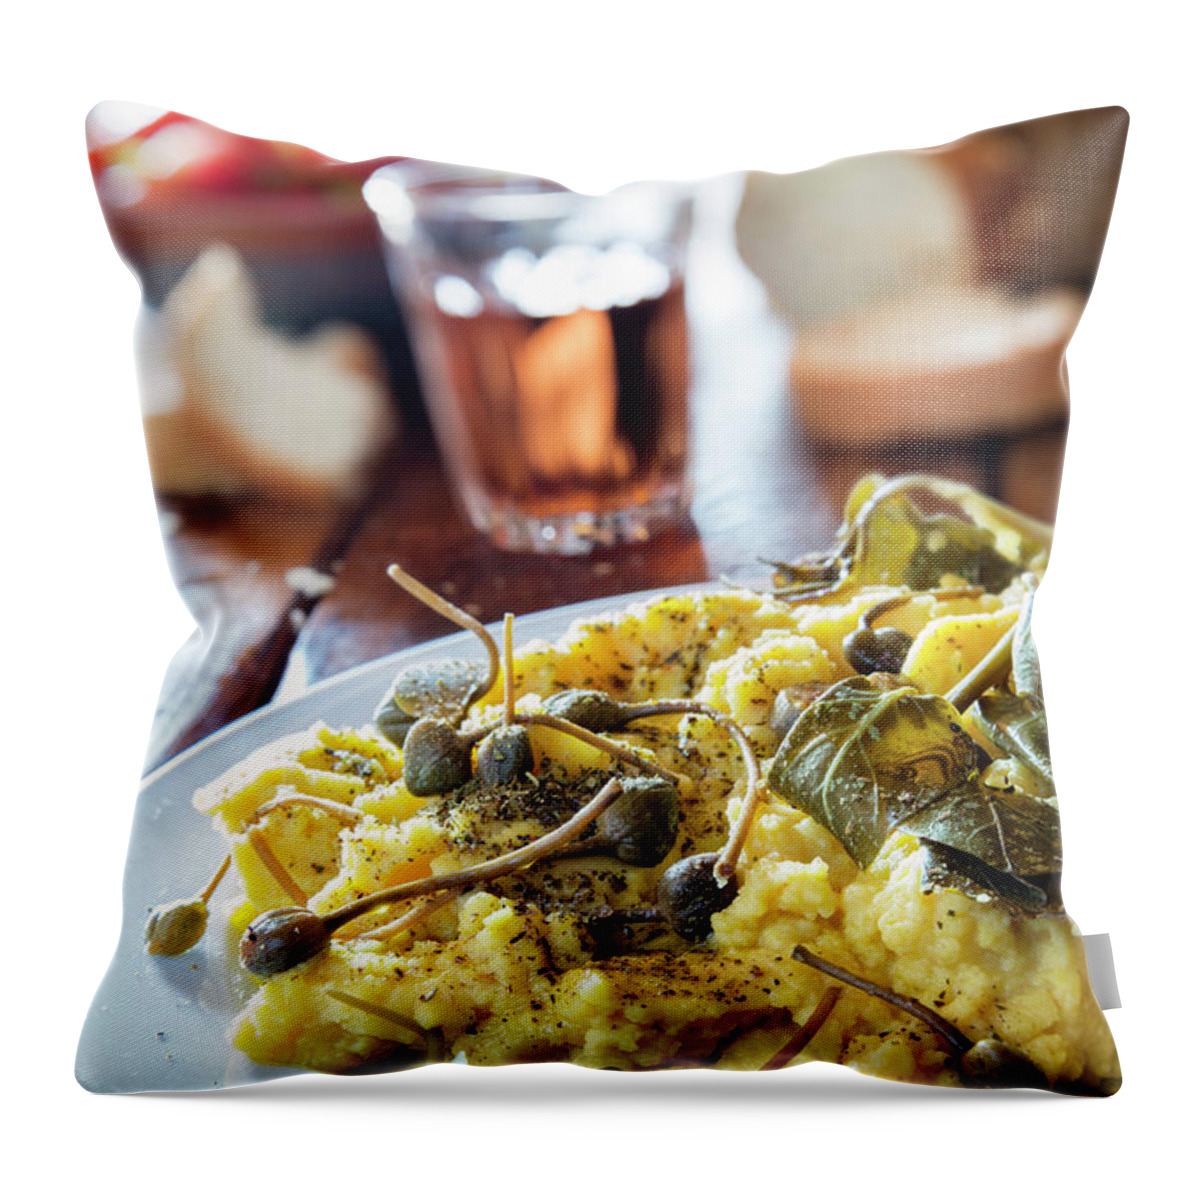 Estock Throw Pillow featuring the digital art Fava Dish With Capers by Massimo Ripani